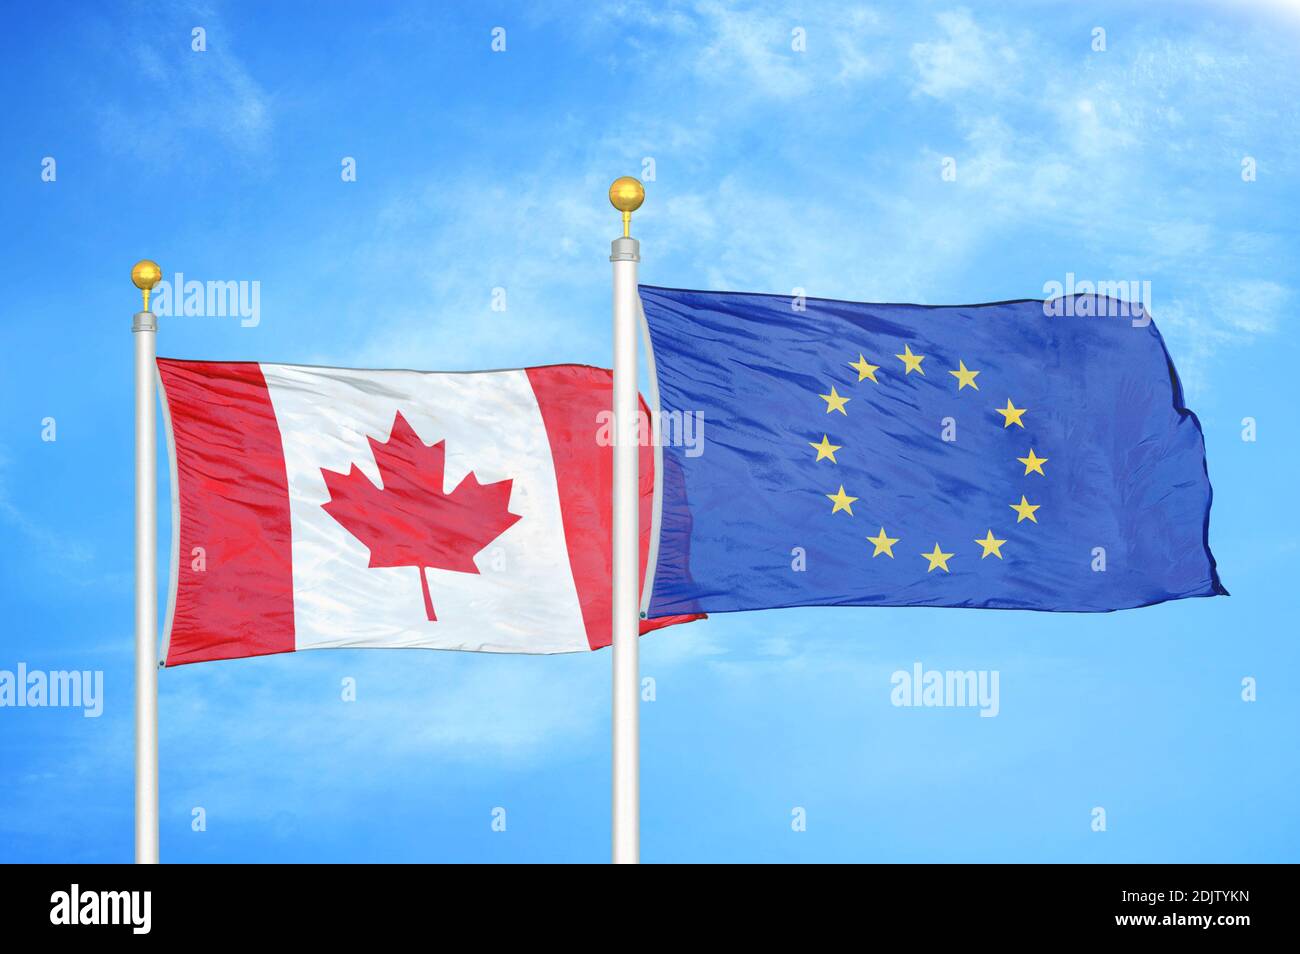 Canada and European Union two flags on flagpoles and blue cloudy sky Stock Photo